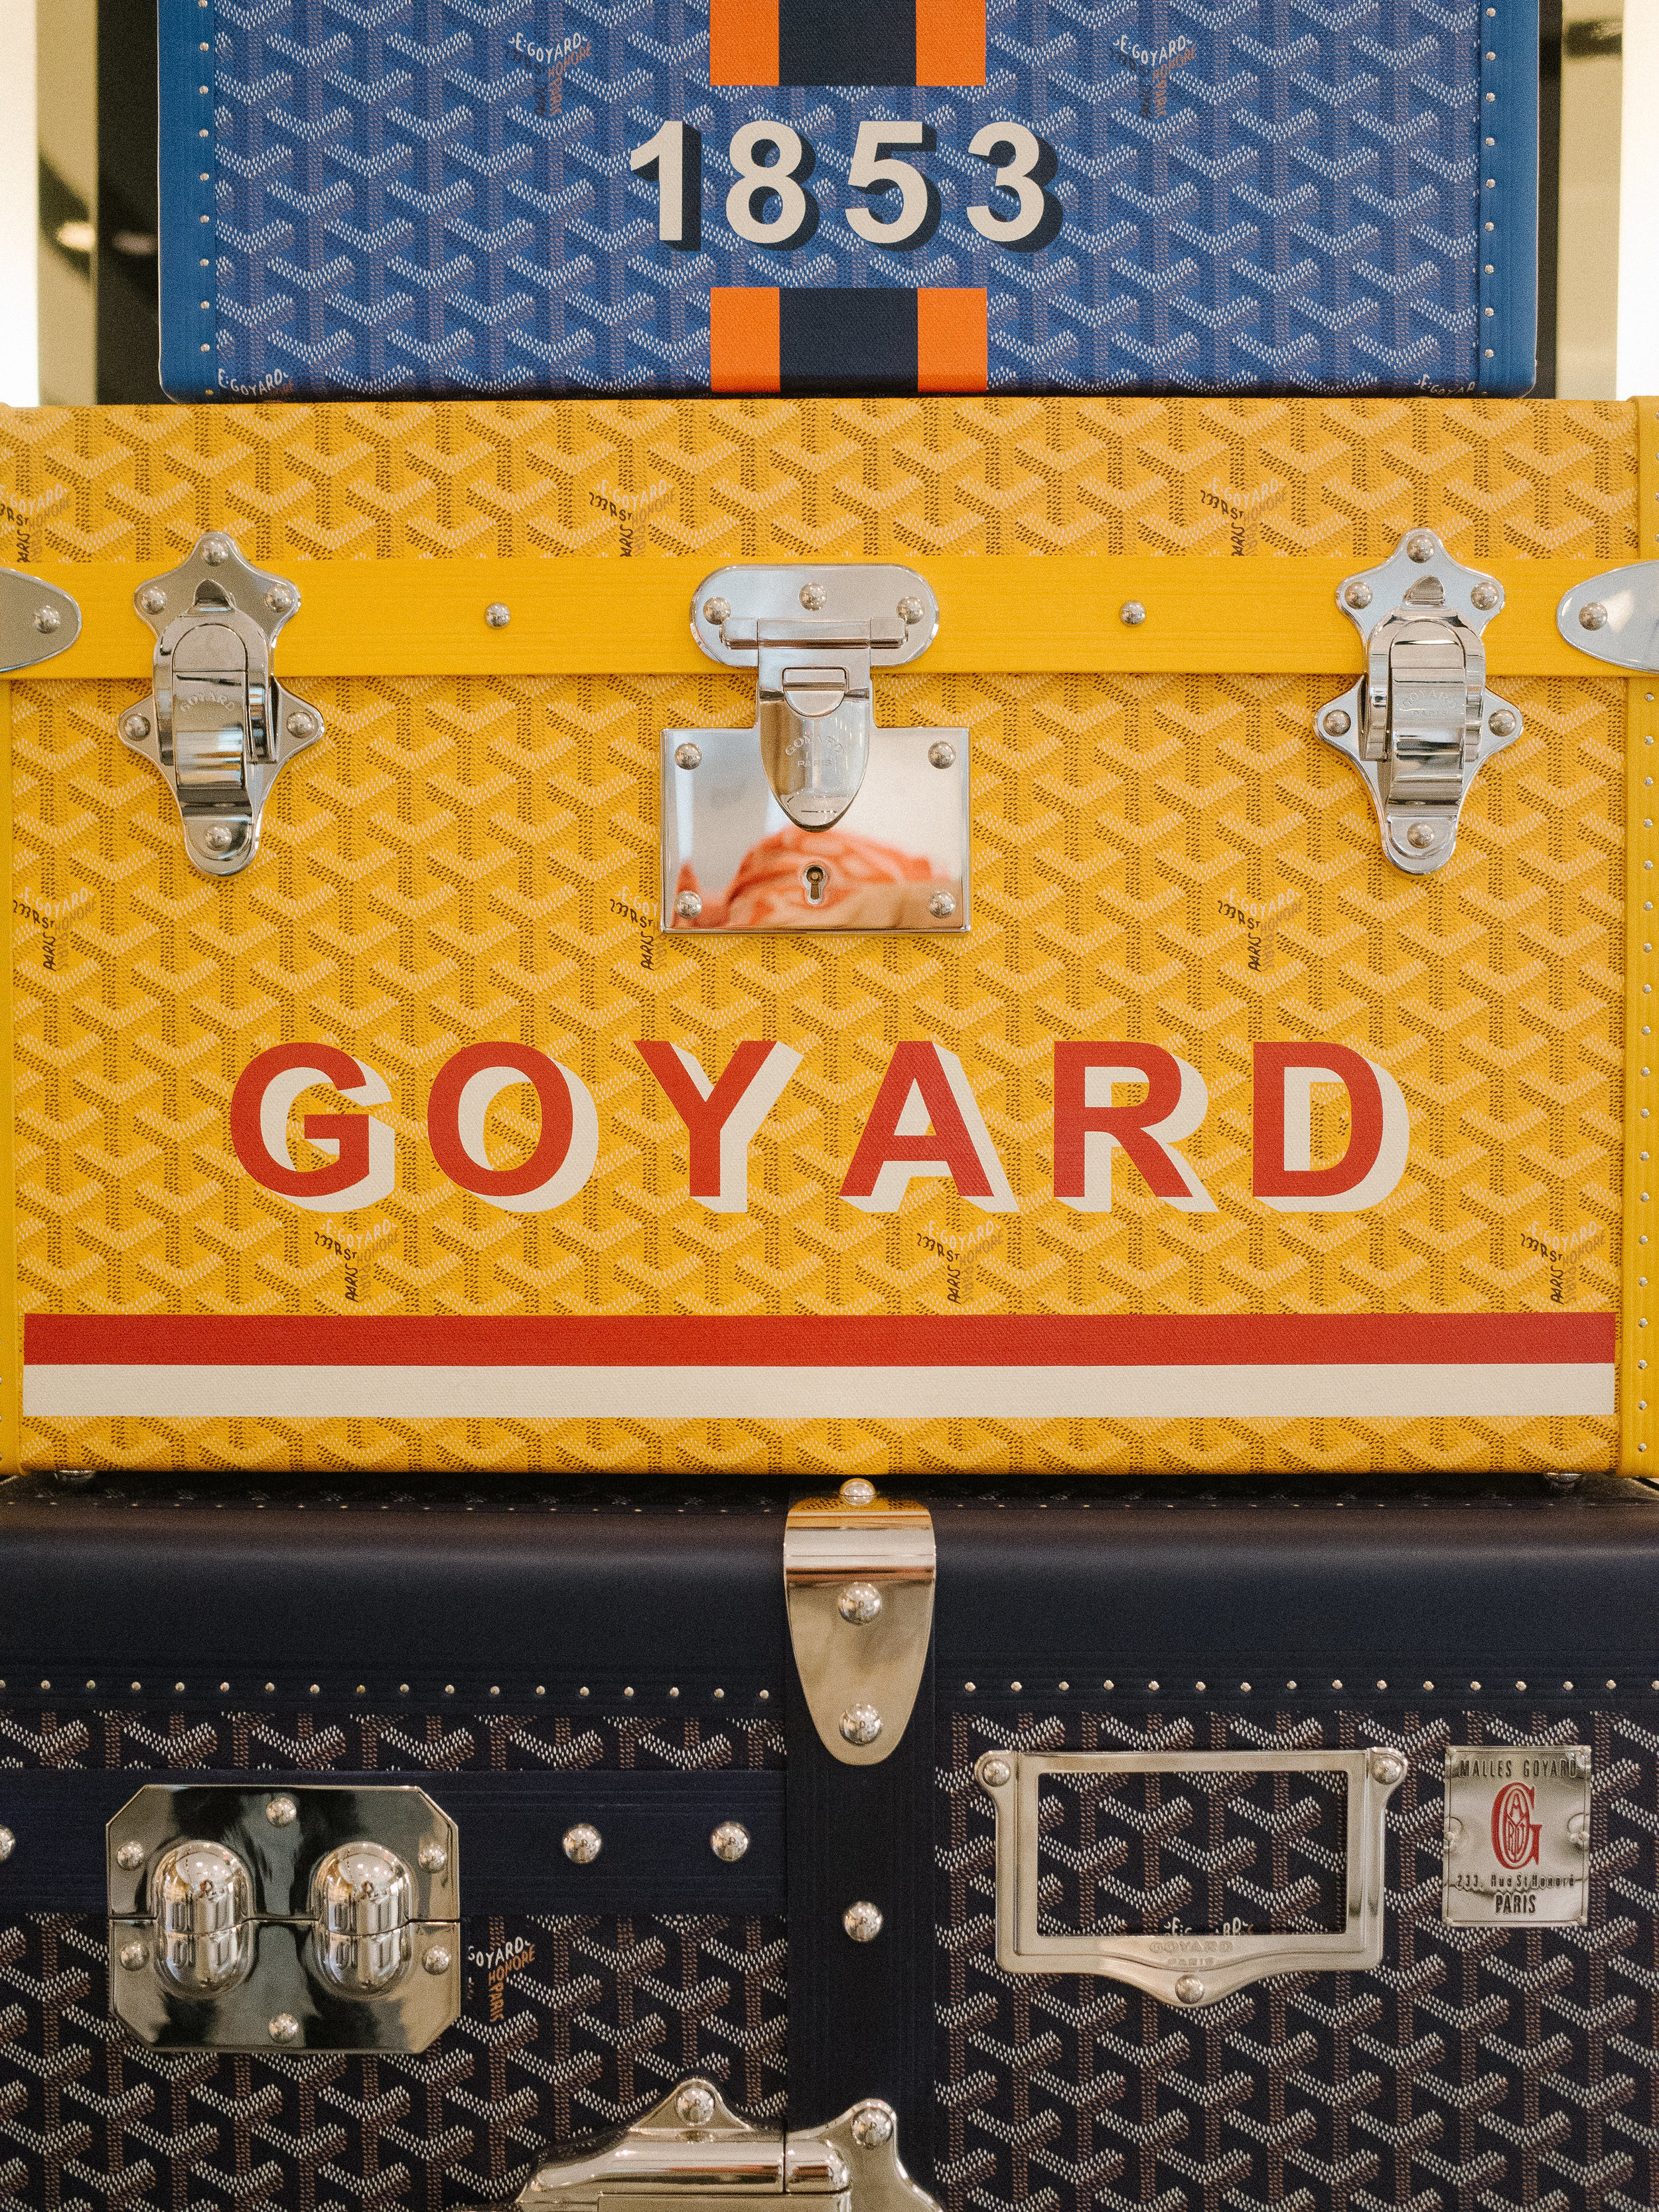 FridayFakeOut: Is this Goyard real or fake?